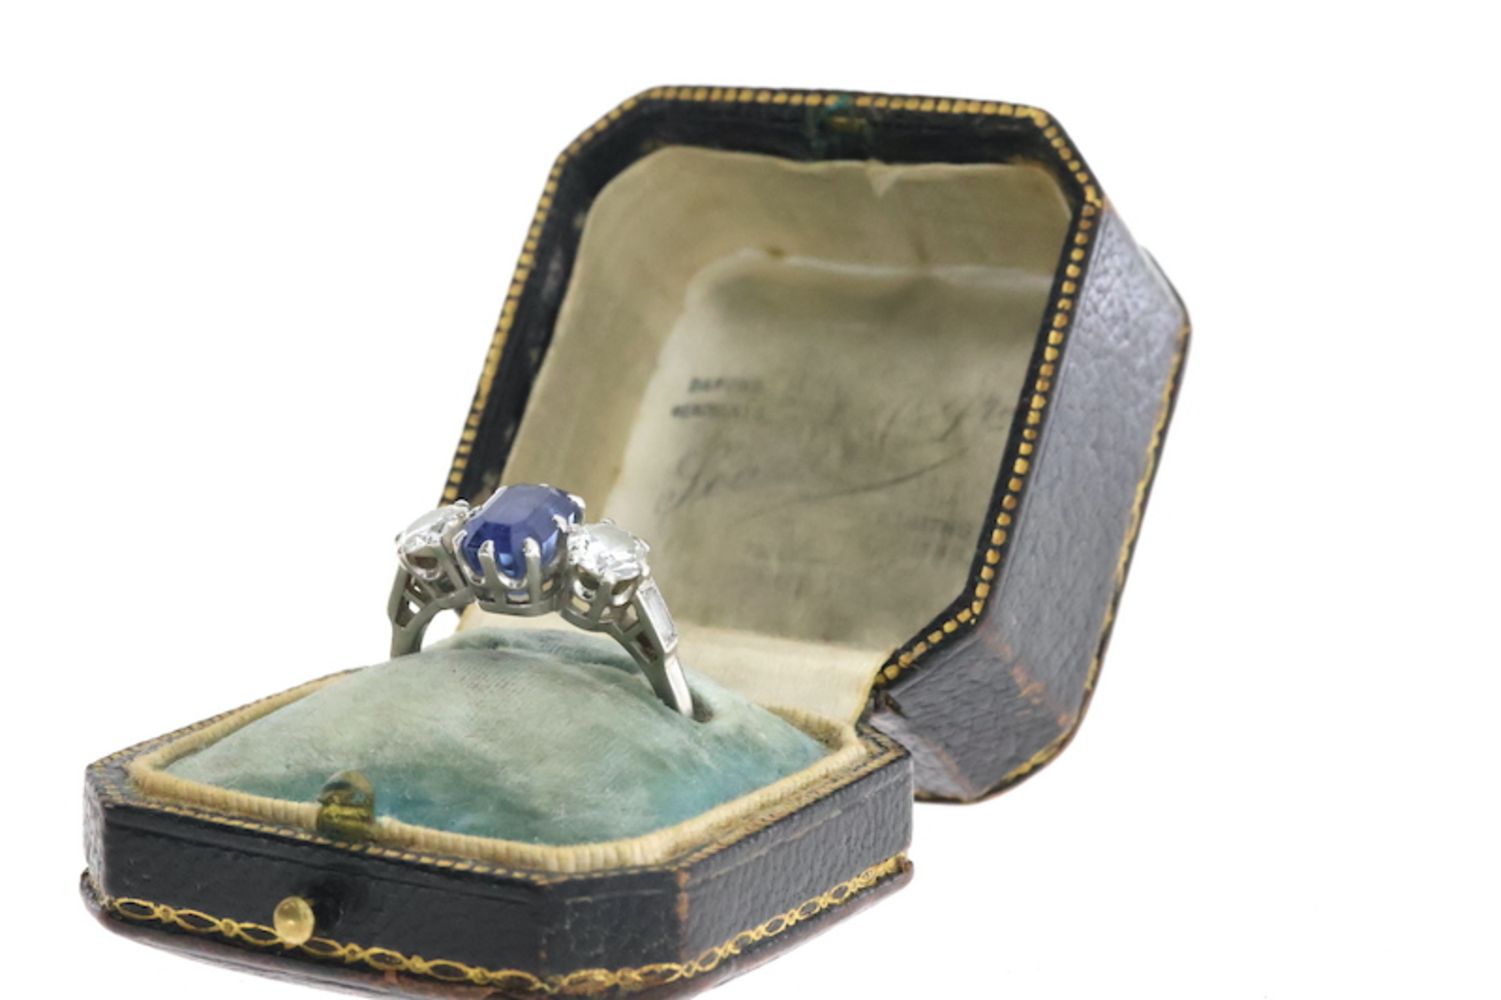 Timed Auction of Watches & Jewellery